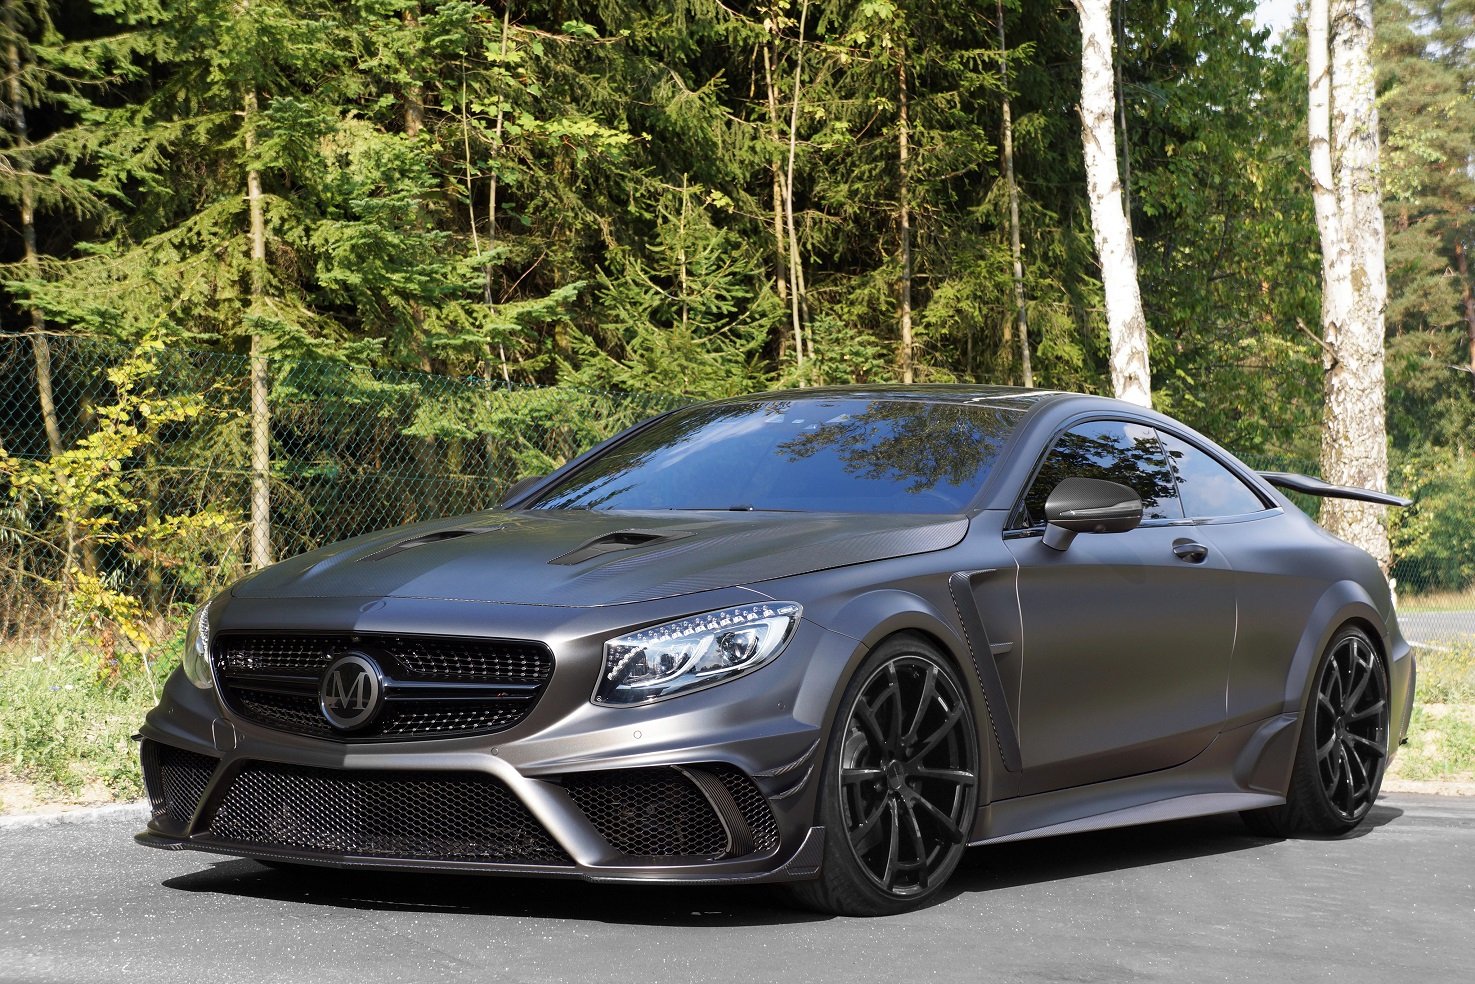 mansory, Mercedes benz, S63, Amg, Coupe, Black, Edition,  c217 , Cars, Black, 2015 Wallpaper